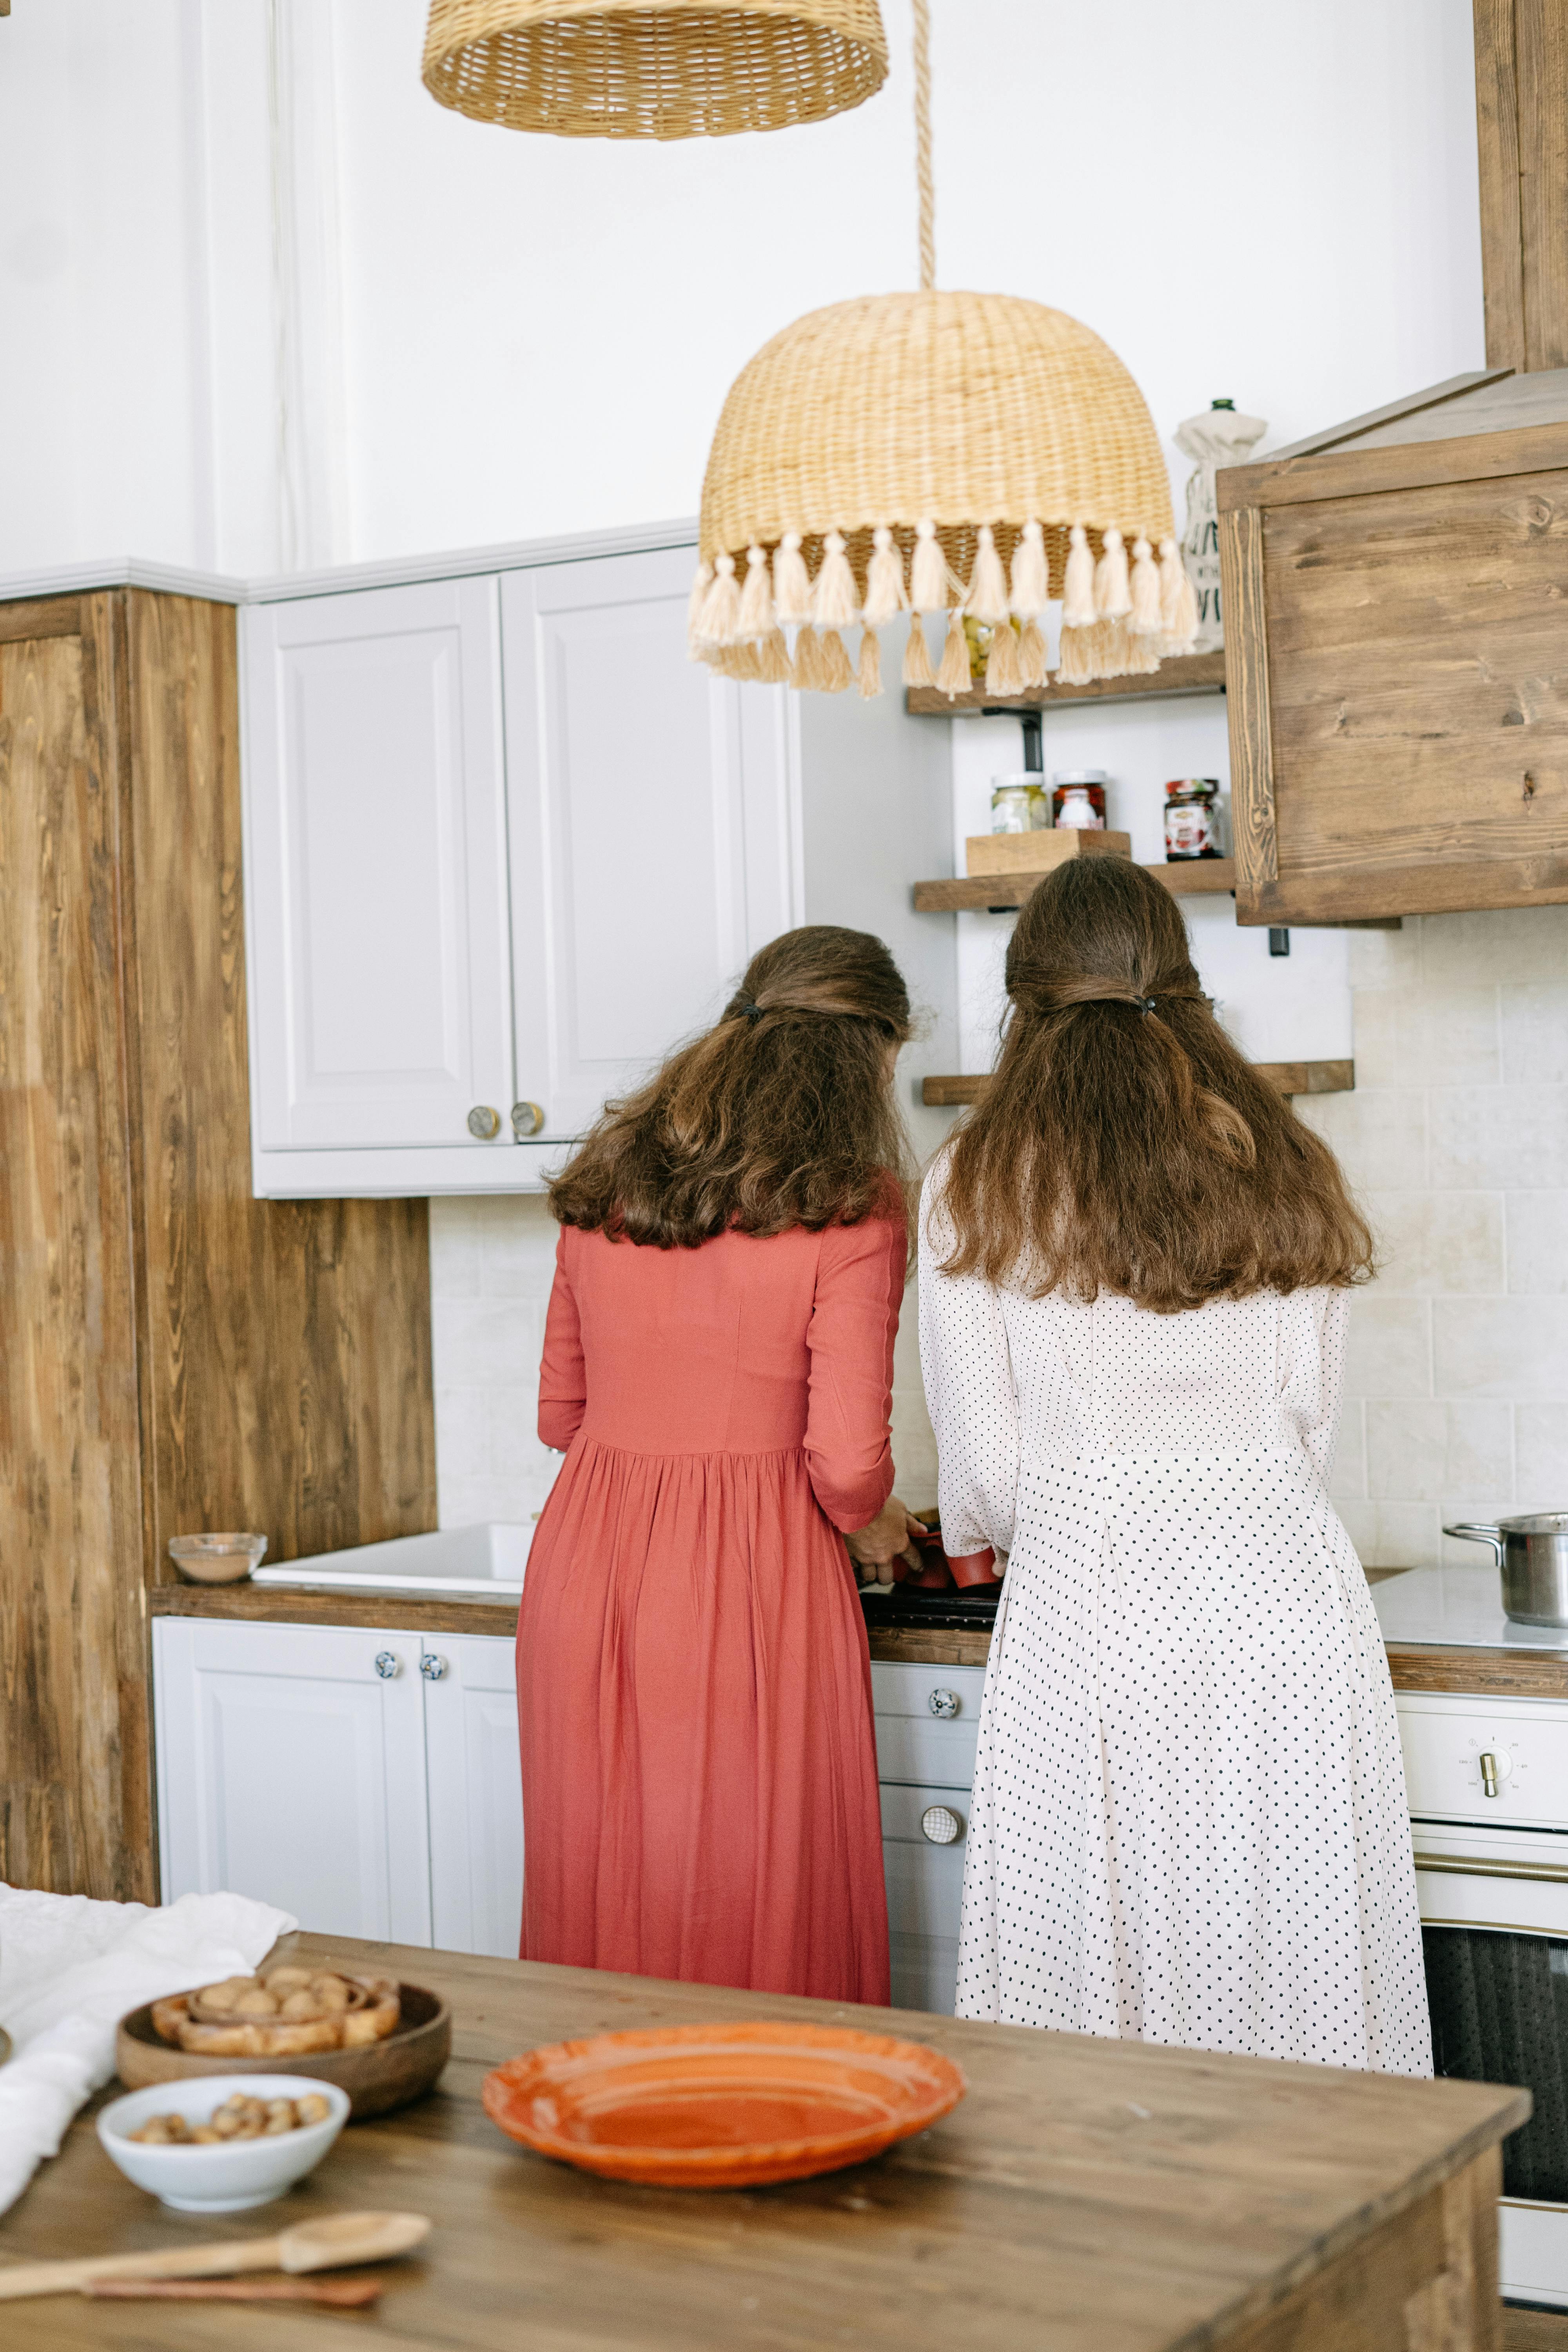 Two women standing in the kitchen | Source: Pexels